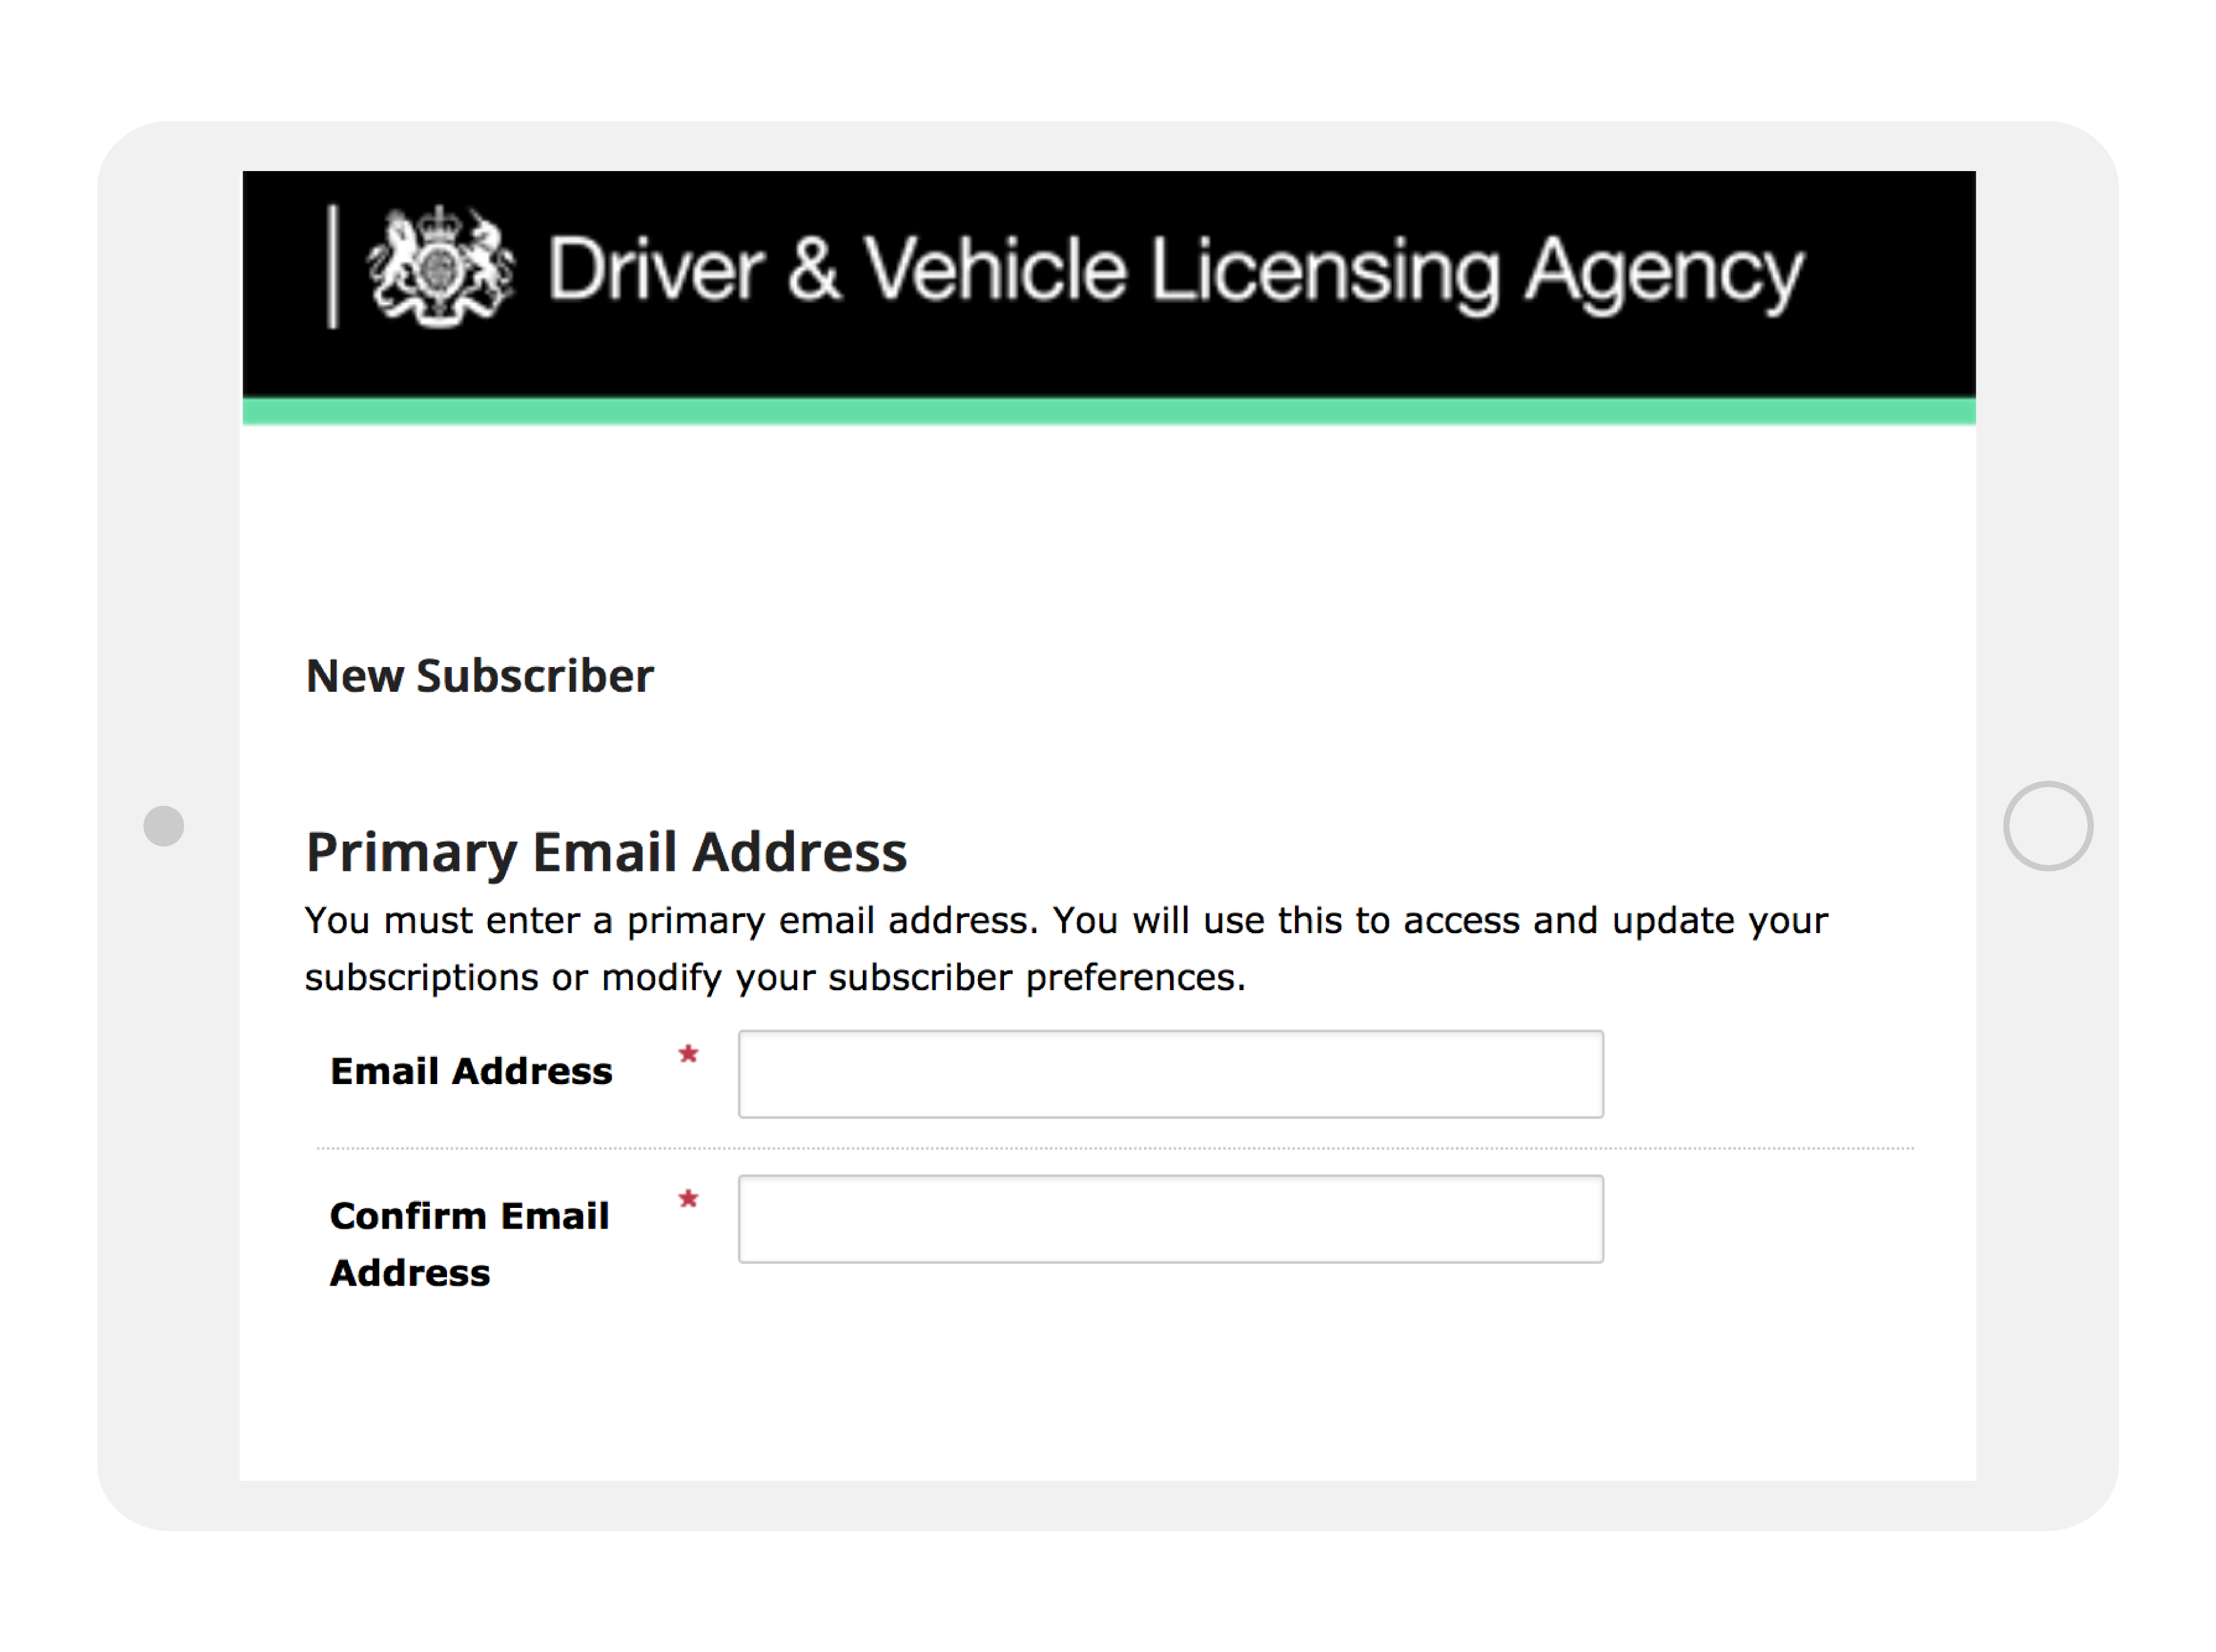 Viewing the GOV UK website subscription management service: page entitled 'New Subscriber Primary Email Address', fill out fields. Click on Submit.